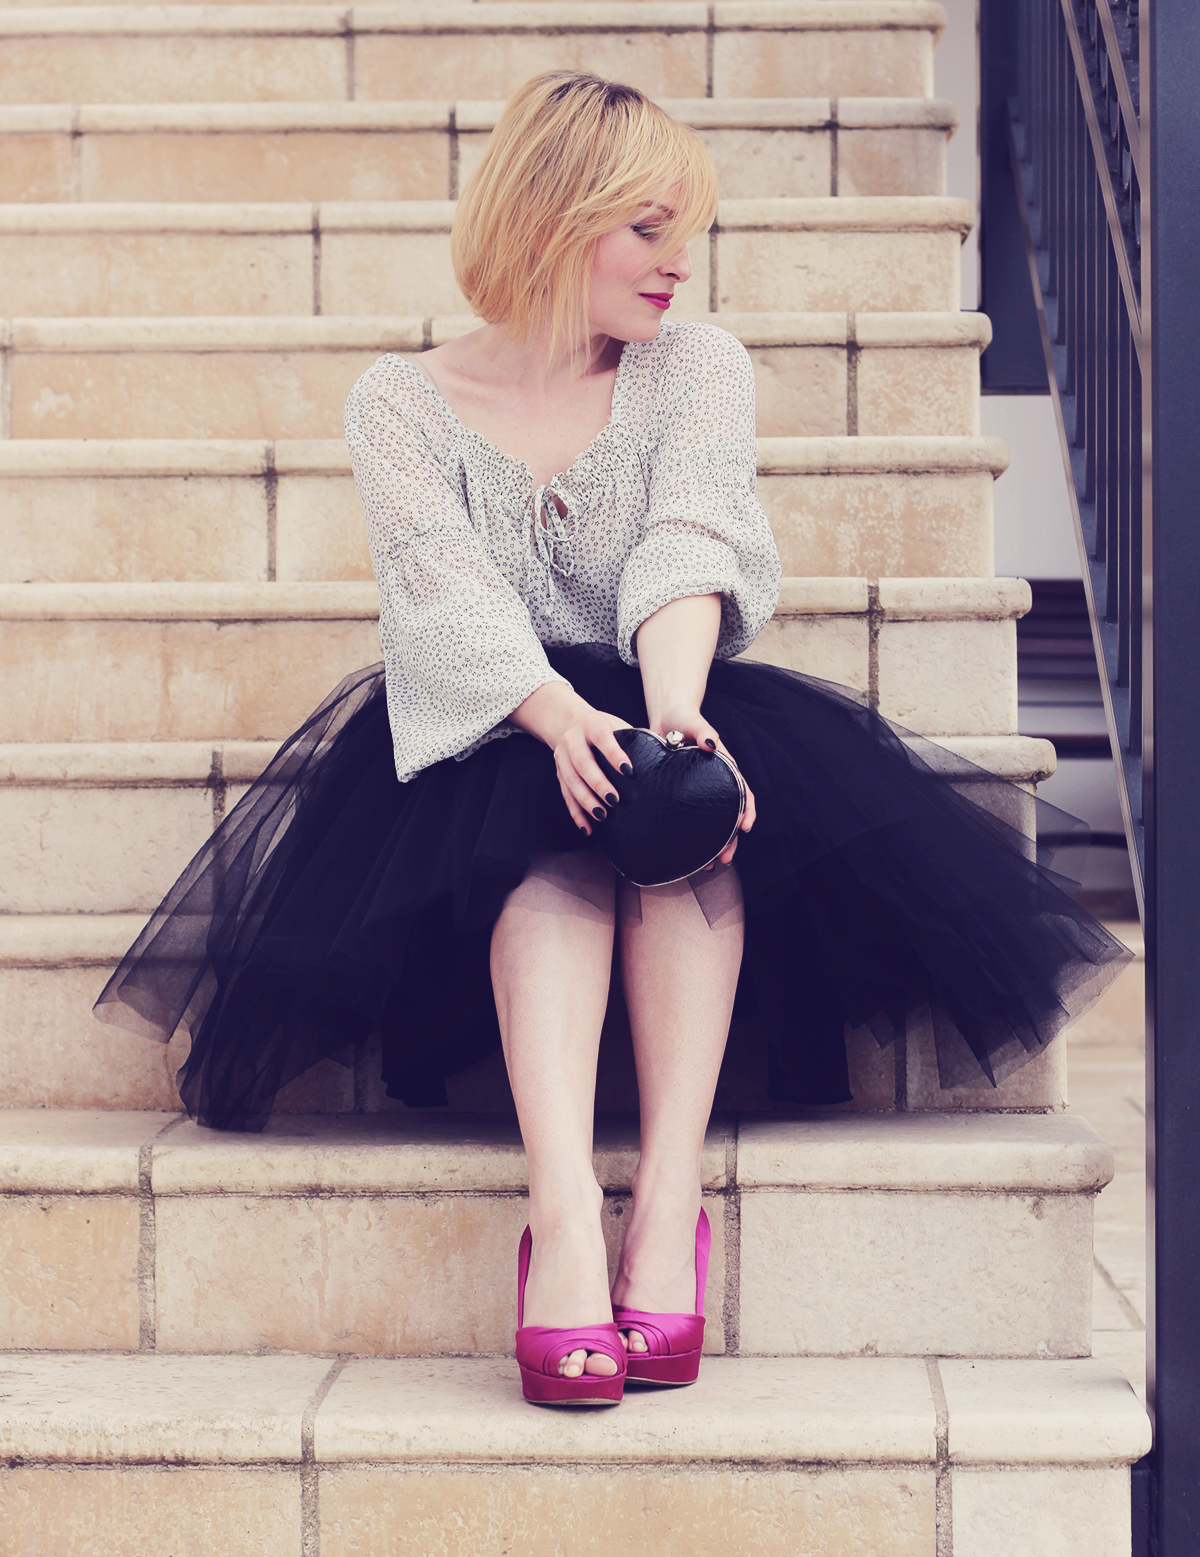 the tulle skirt and heart shaped clutch with pink pumps